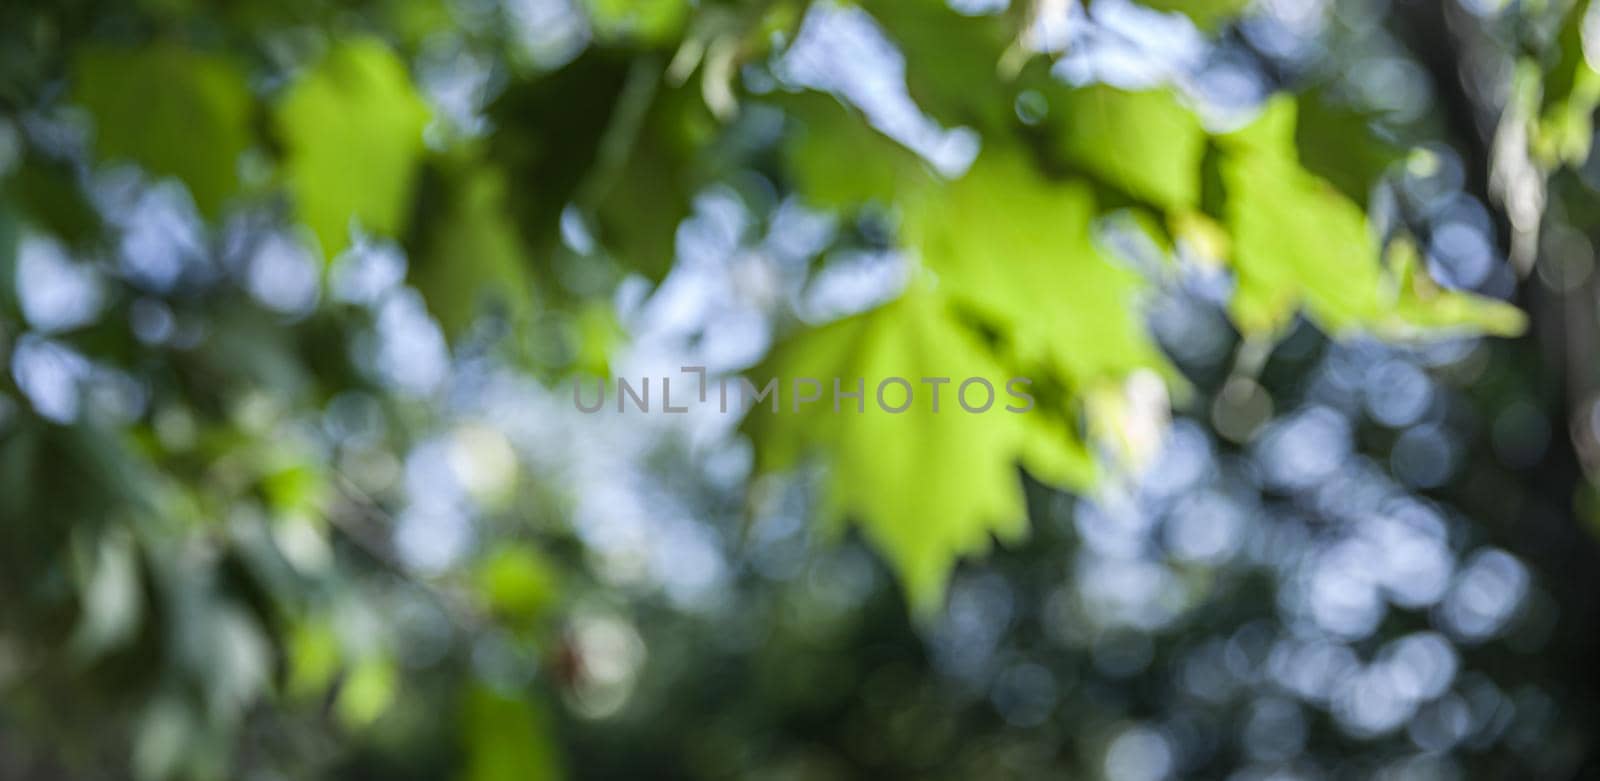 Nature abstract background. Defocused bokeh background. Natural blurred background with trees, leaves and glare of sunlight